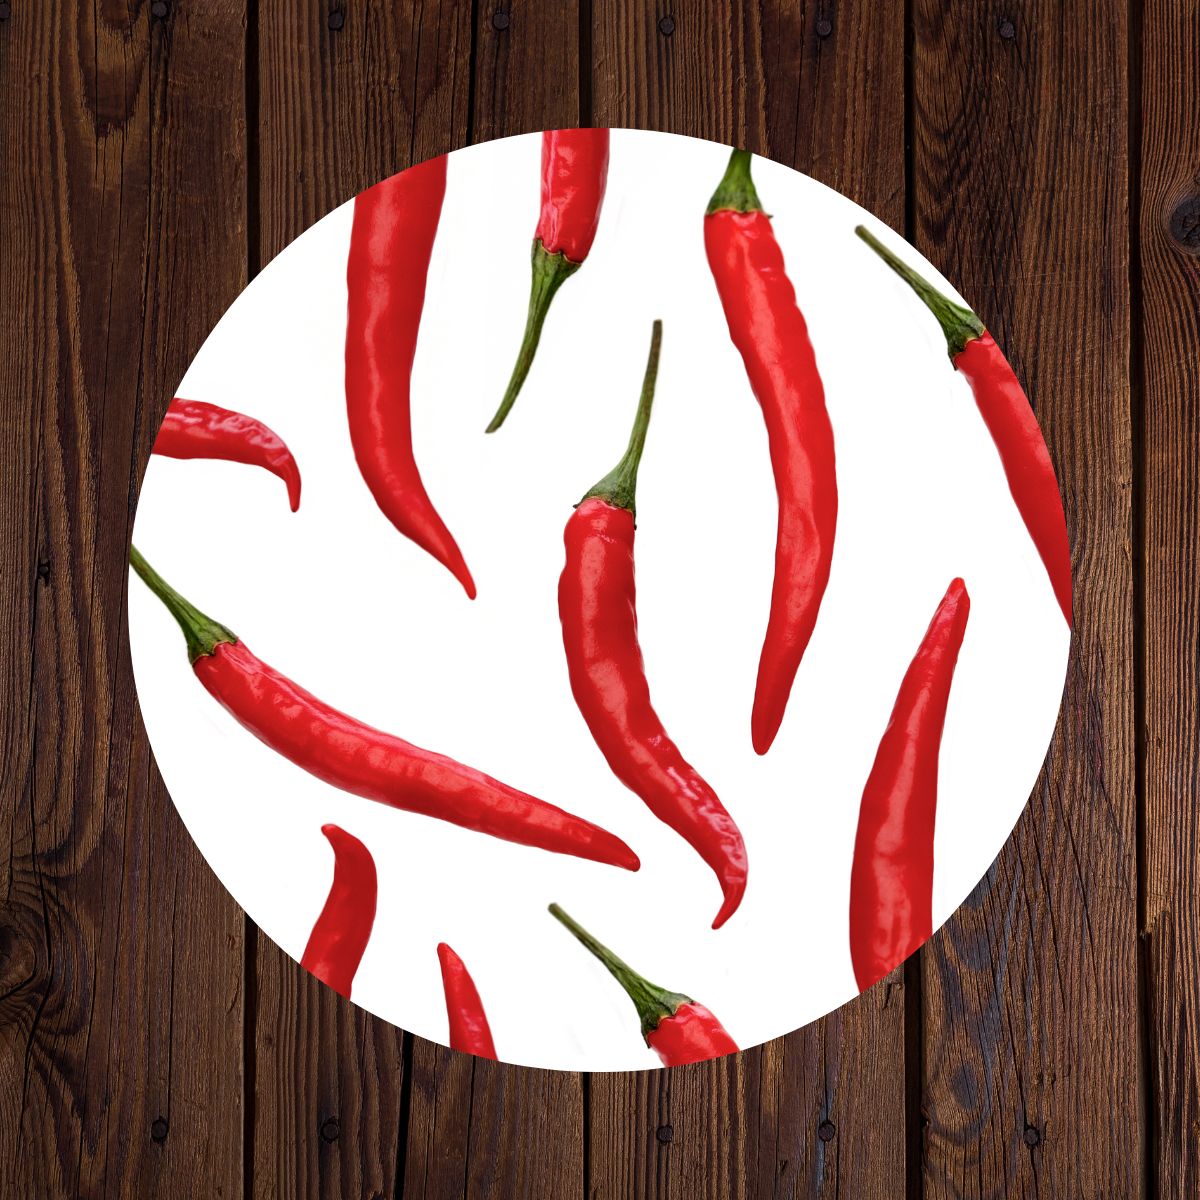 A chili pepper plate sitting on a wooden table.